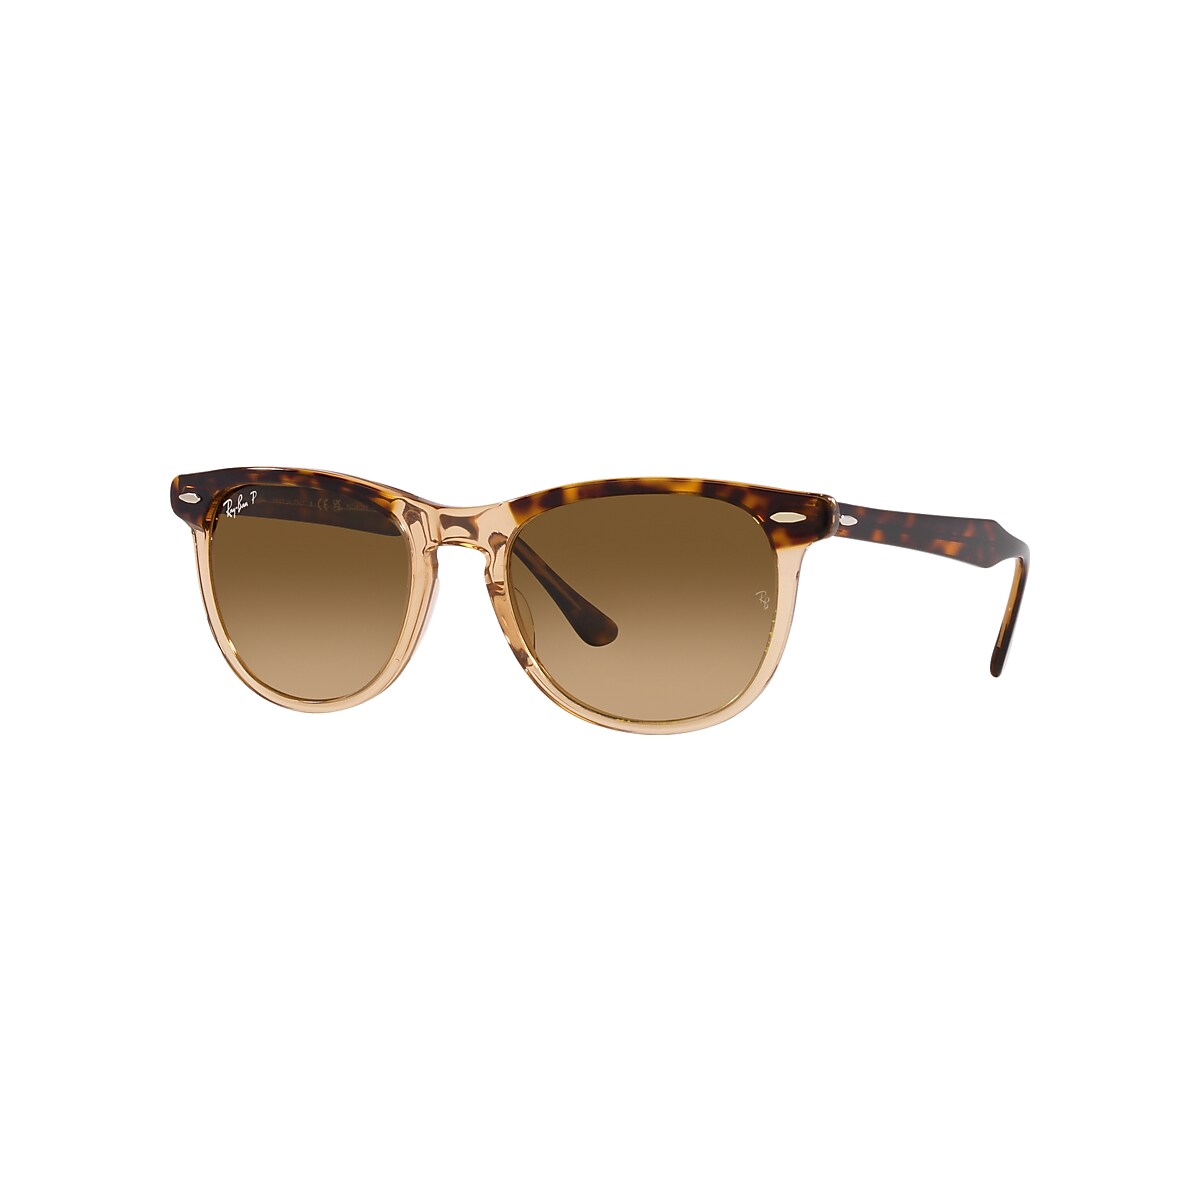 EAGLE EYE Sunglasses in Havana On Transparent Brown and 